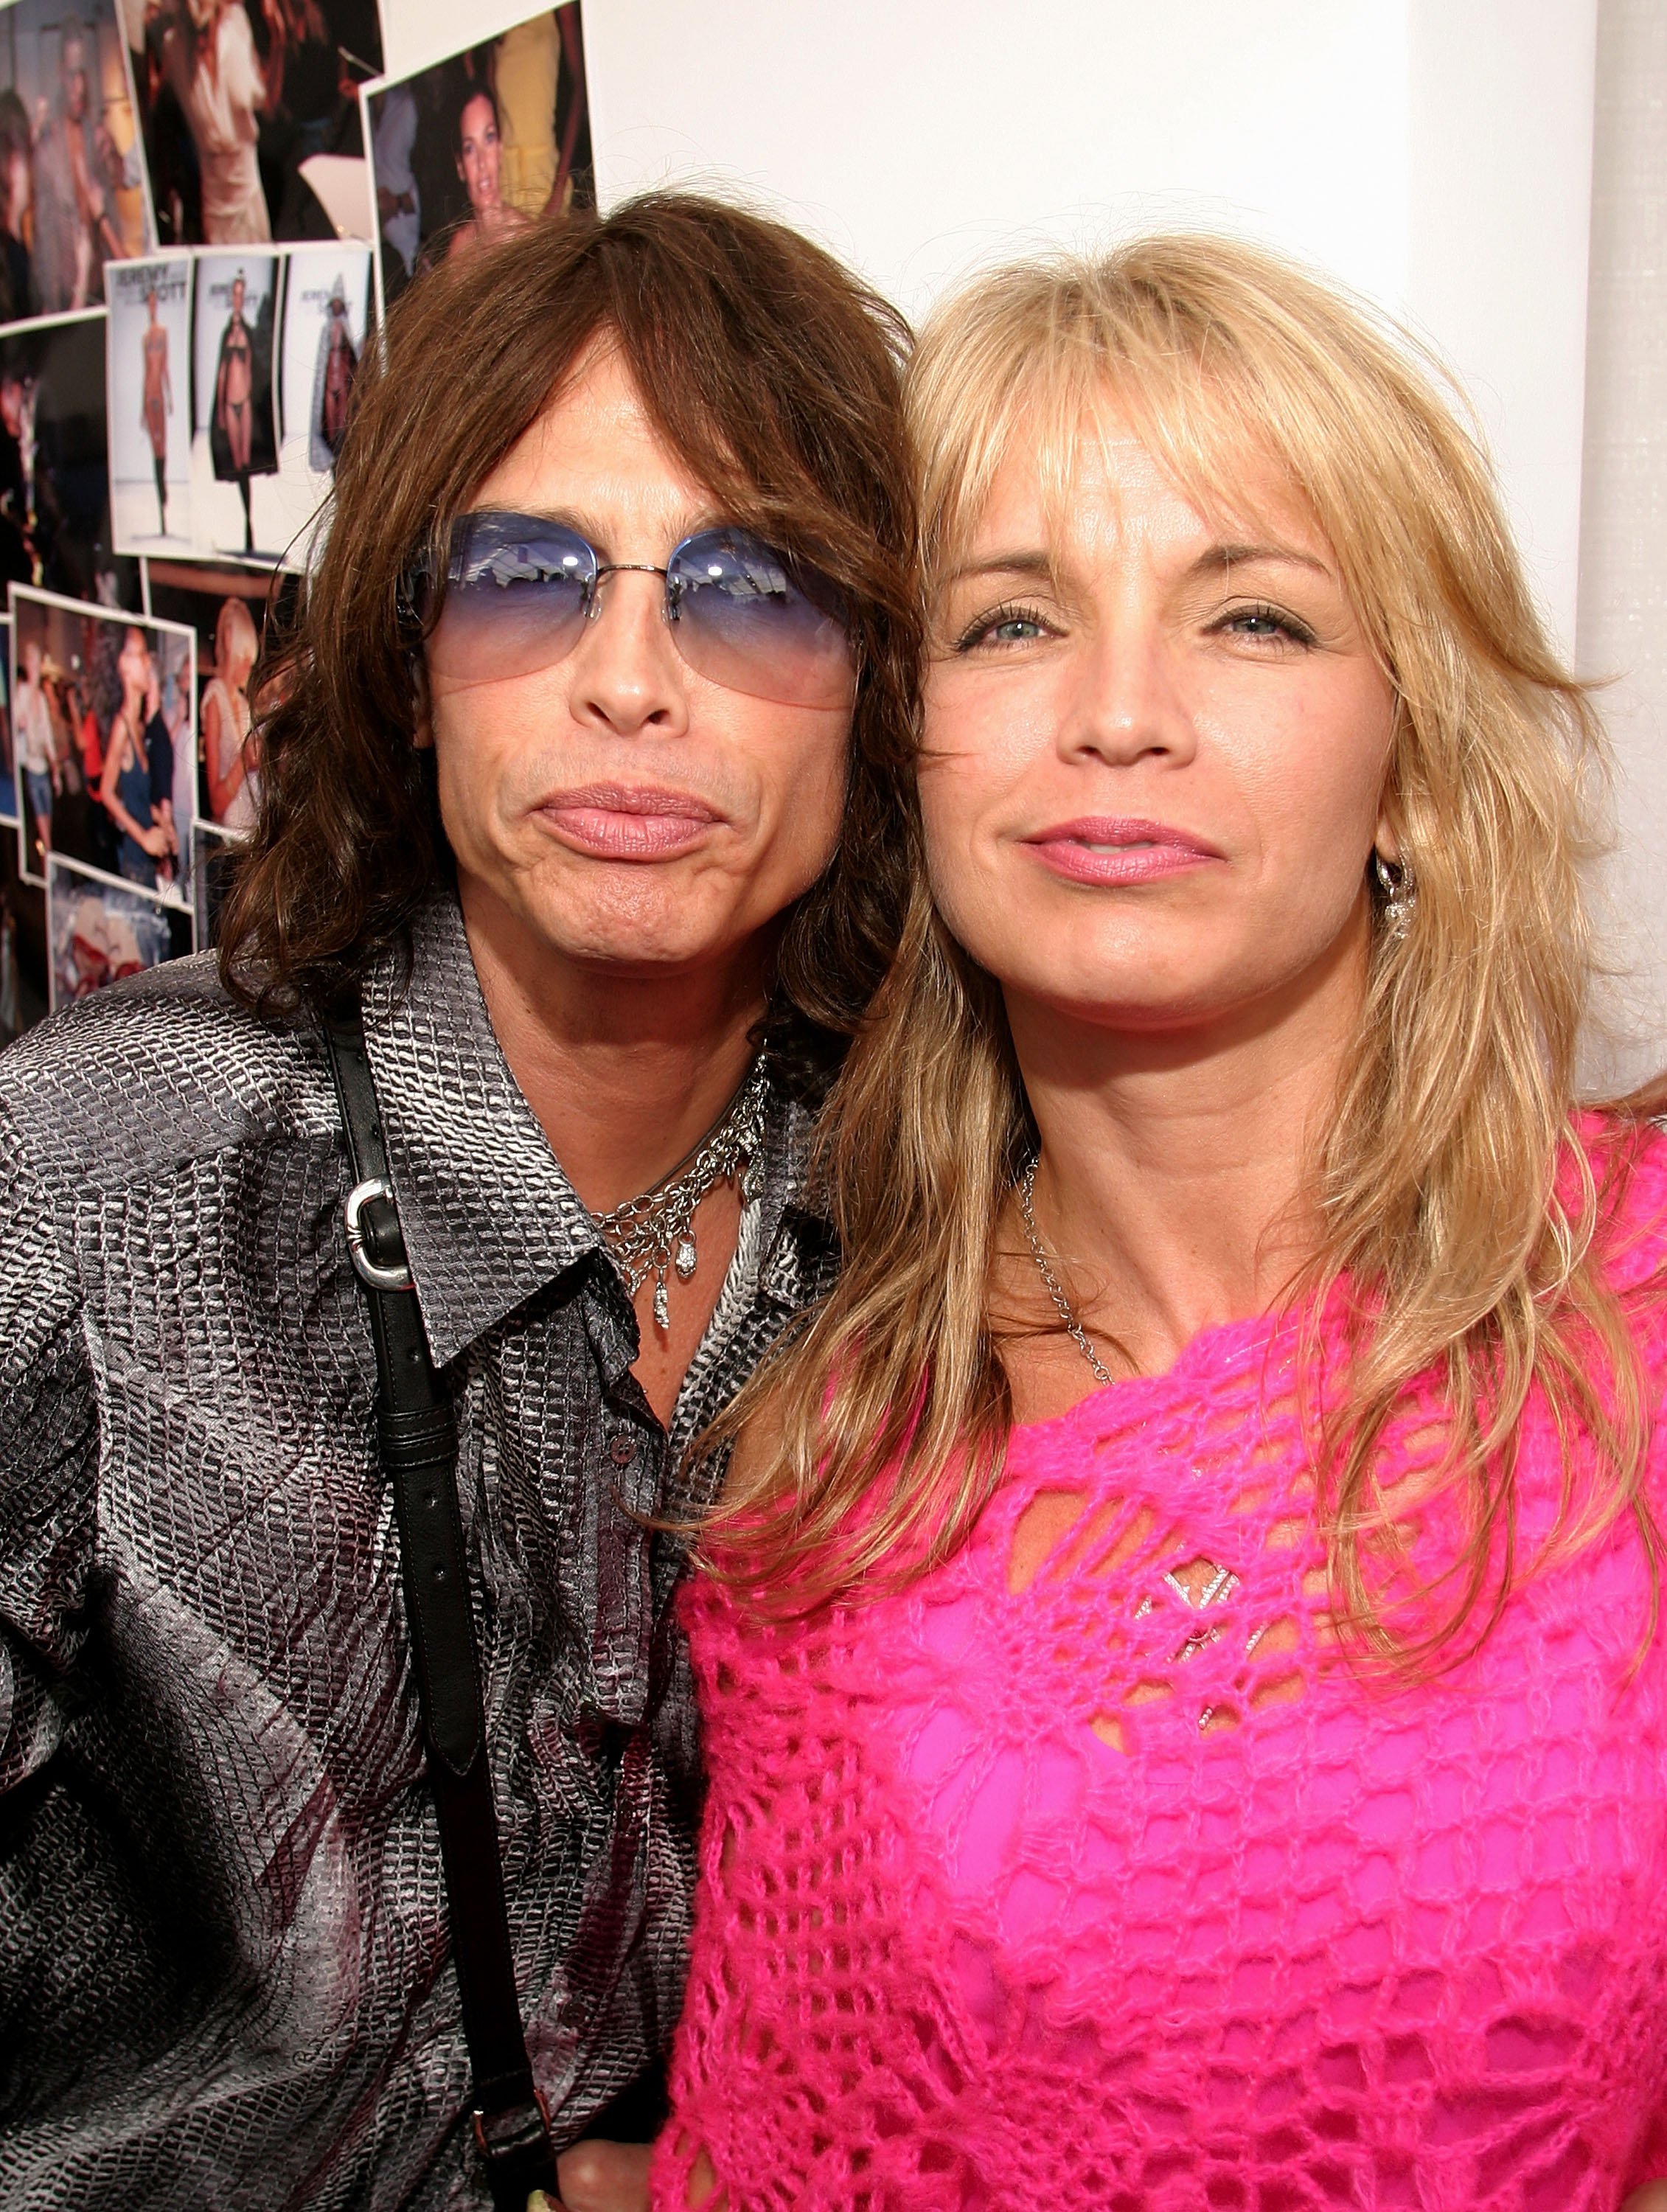 Steven Tyler and Teresa Barrick are seen during the Olympus Fashion Week Spring 2005 at Bryant Park on September 13, 2004, in New York City | Source: Getty Images